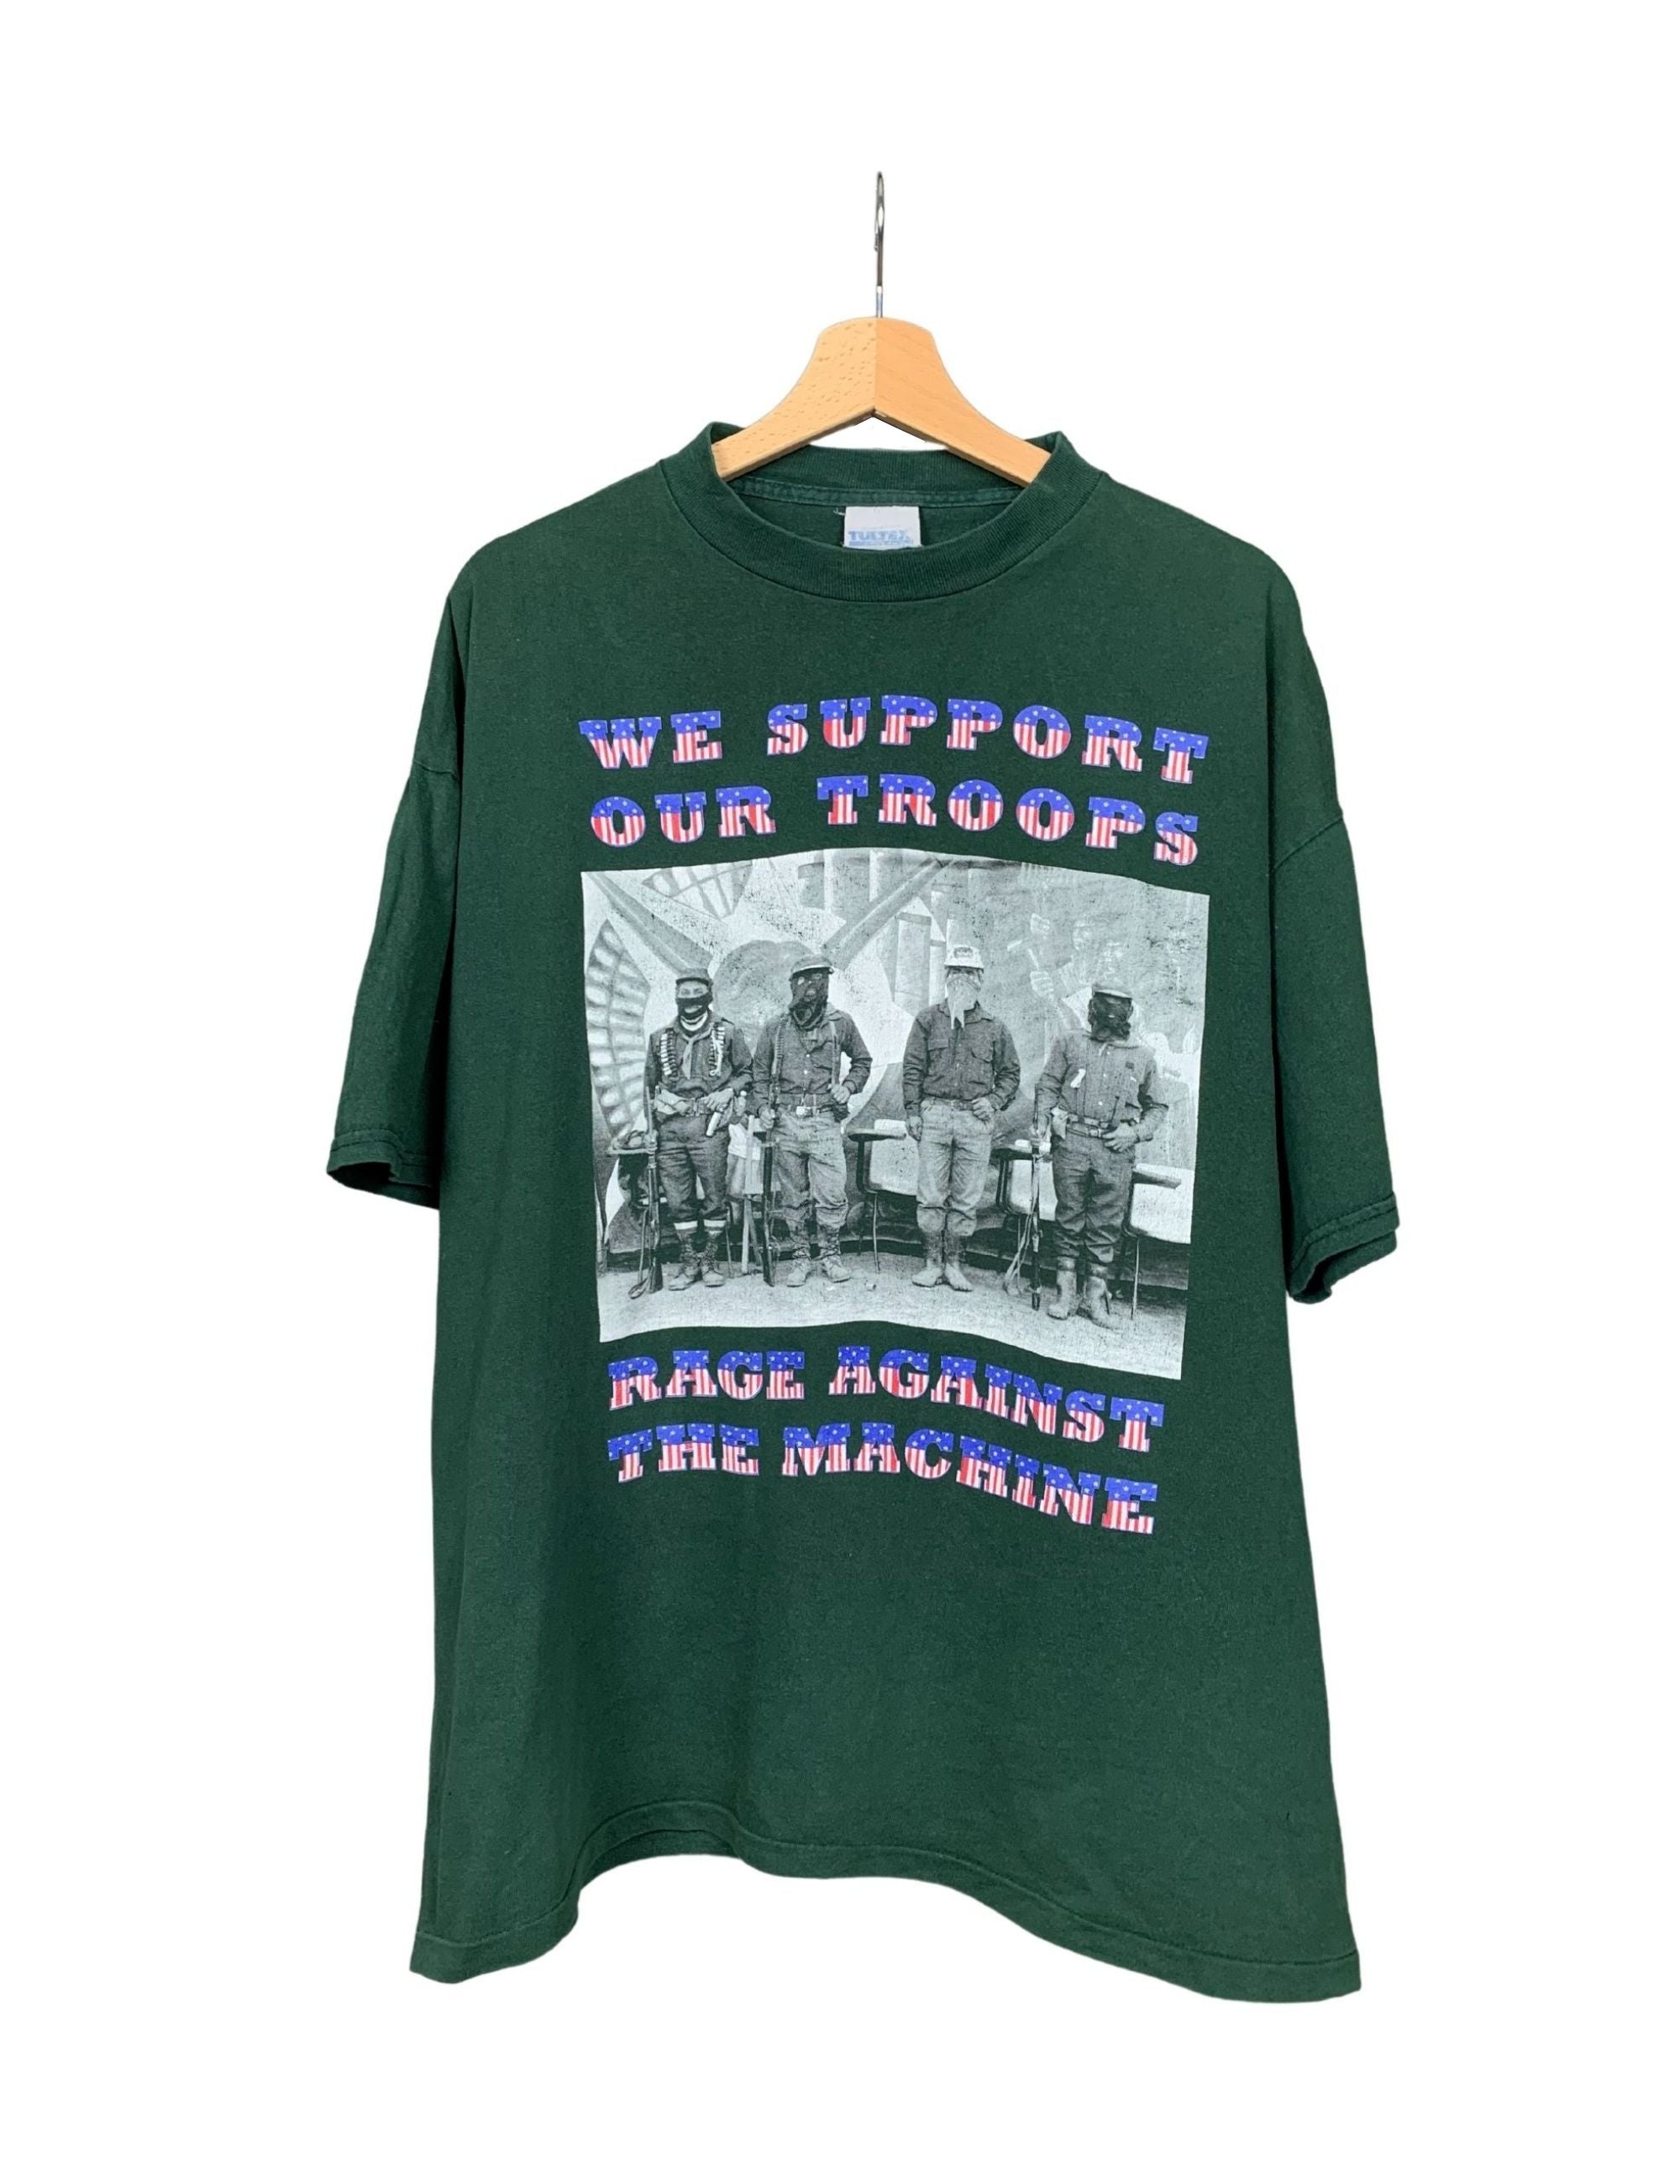 Rage Against The Machine 90s Support The Troops Vintage T-Shirt